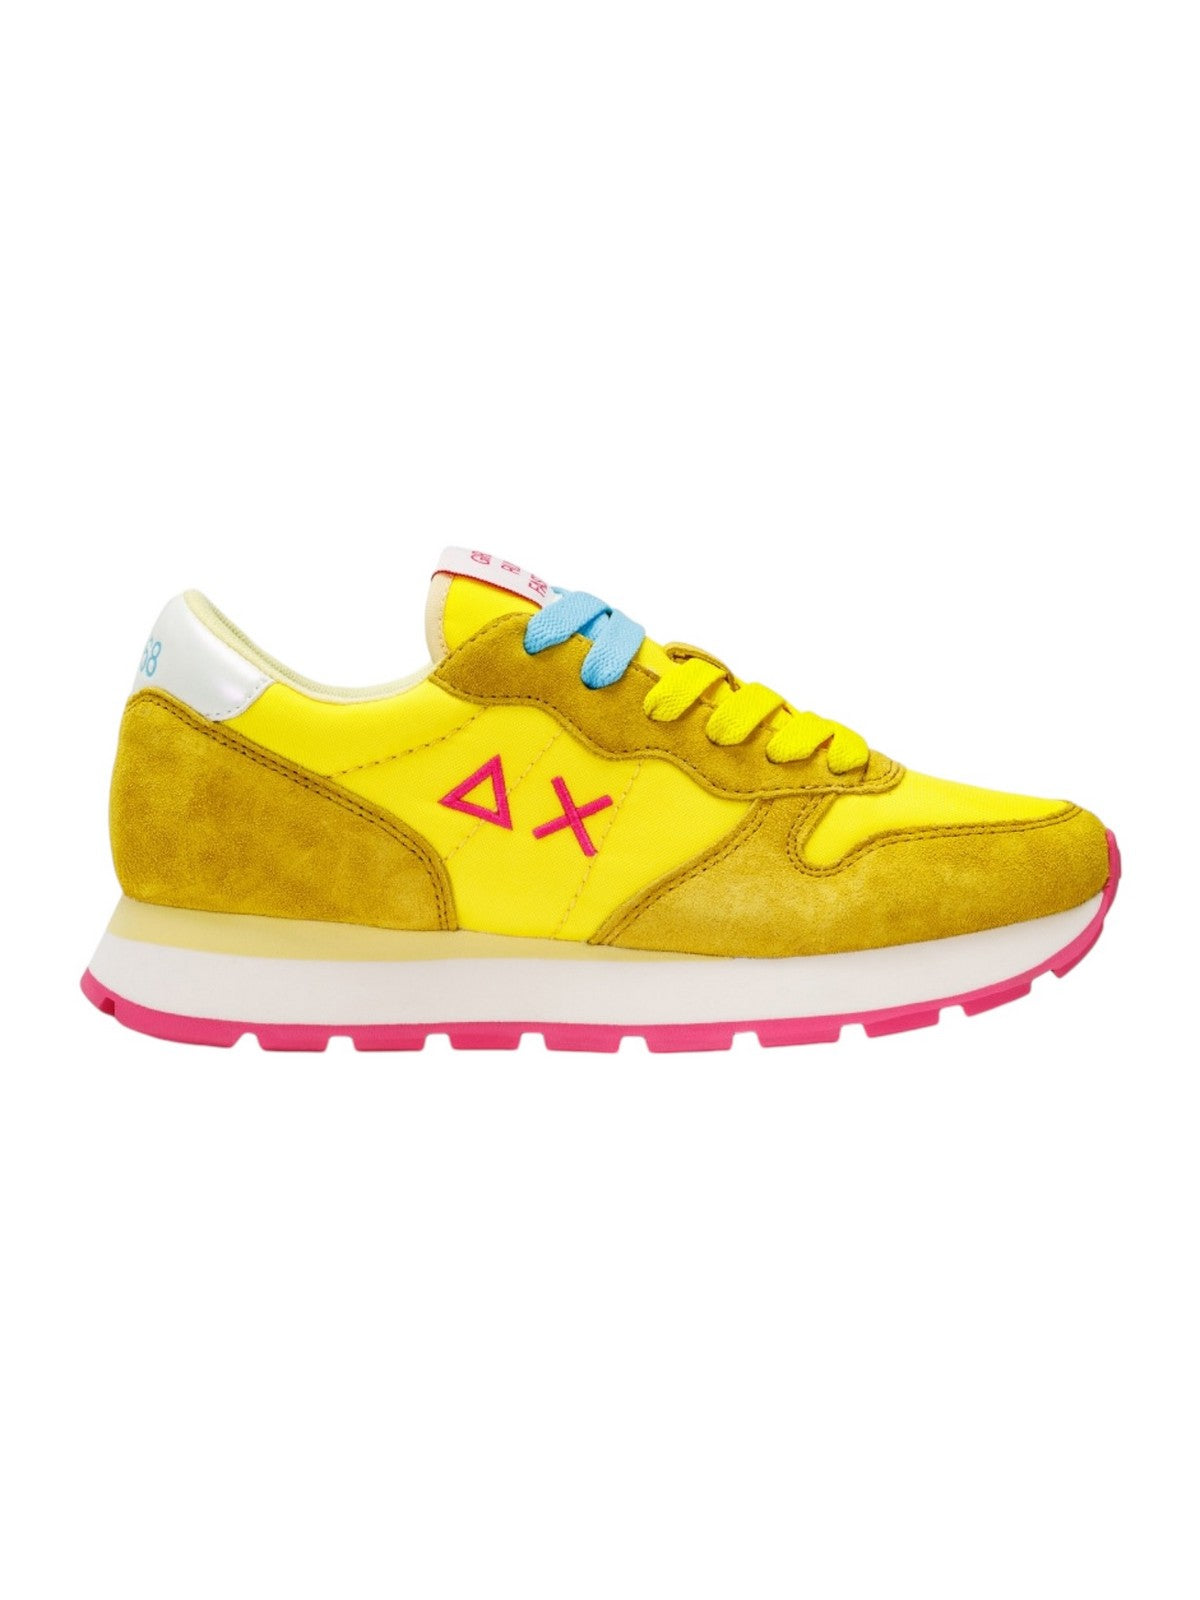 SUN68 Baskets pour femmes Ally solid nylon Z34201 23 Yellow